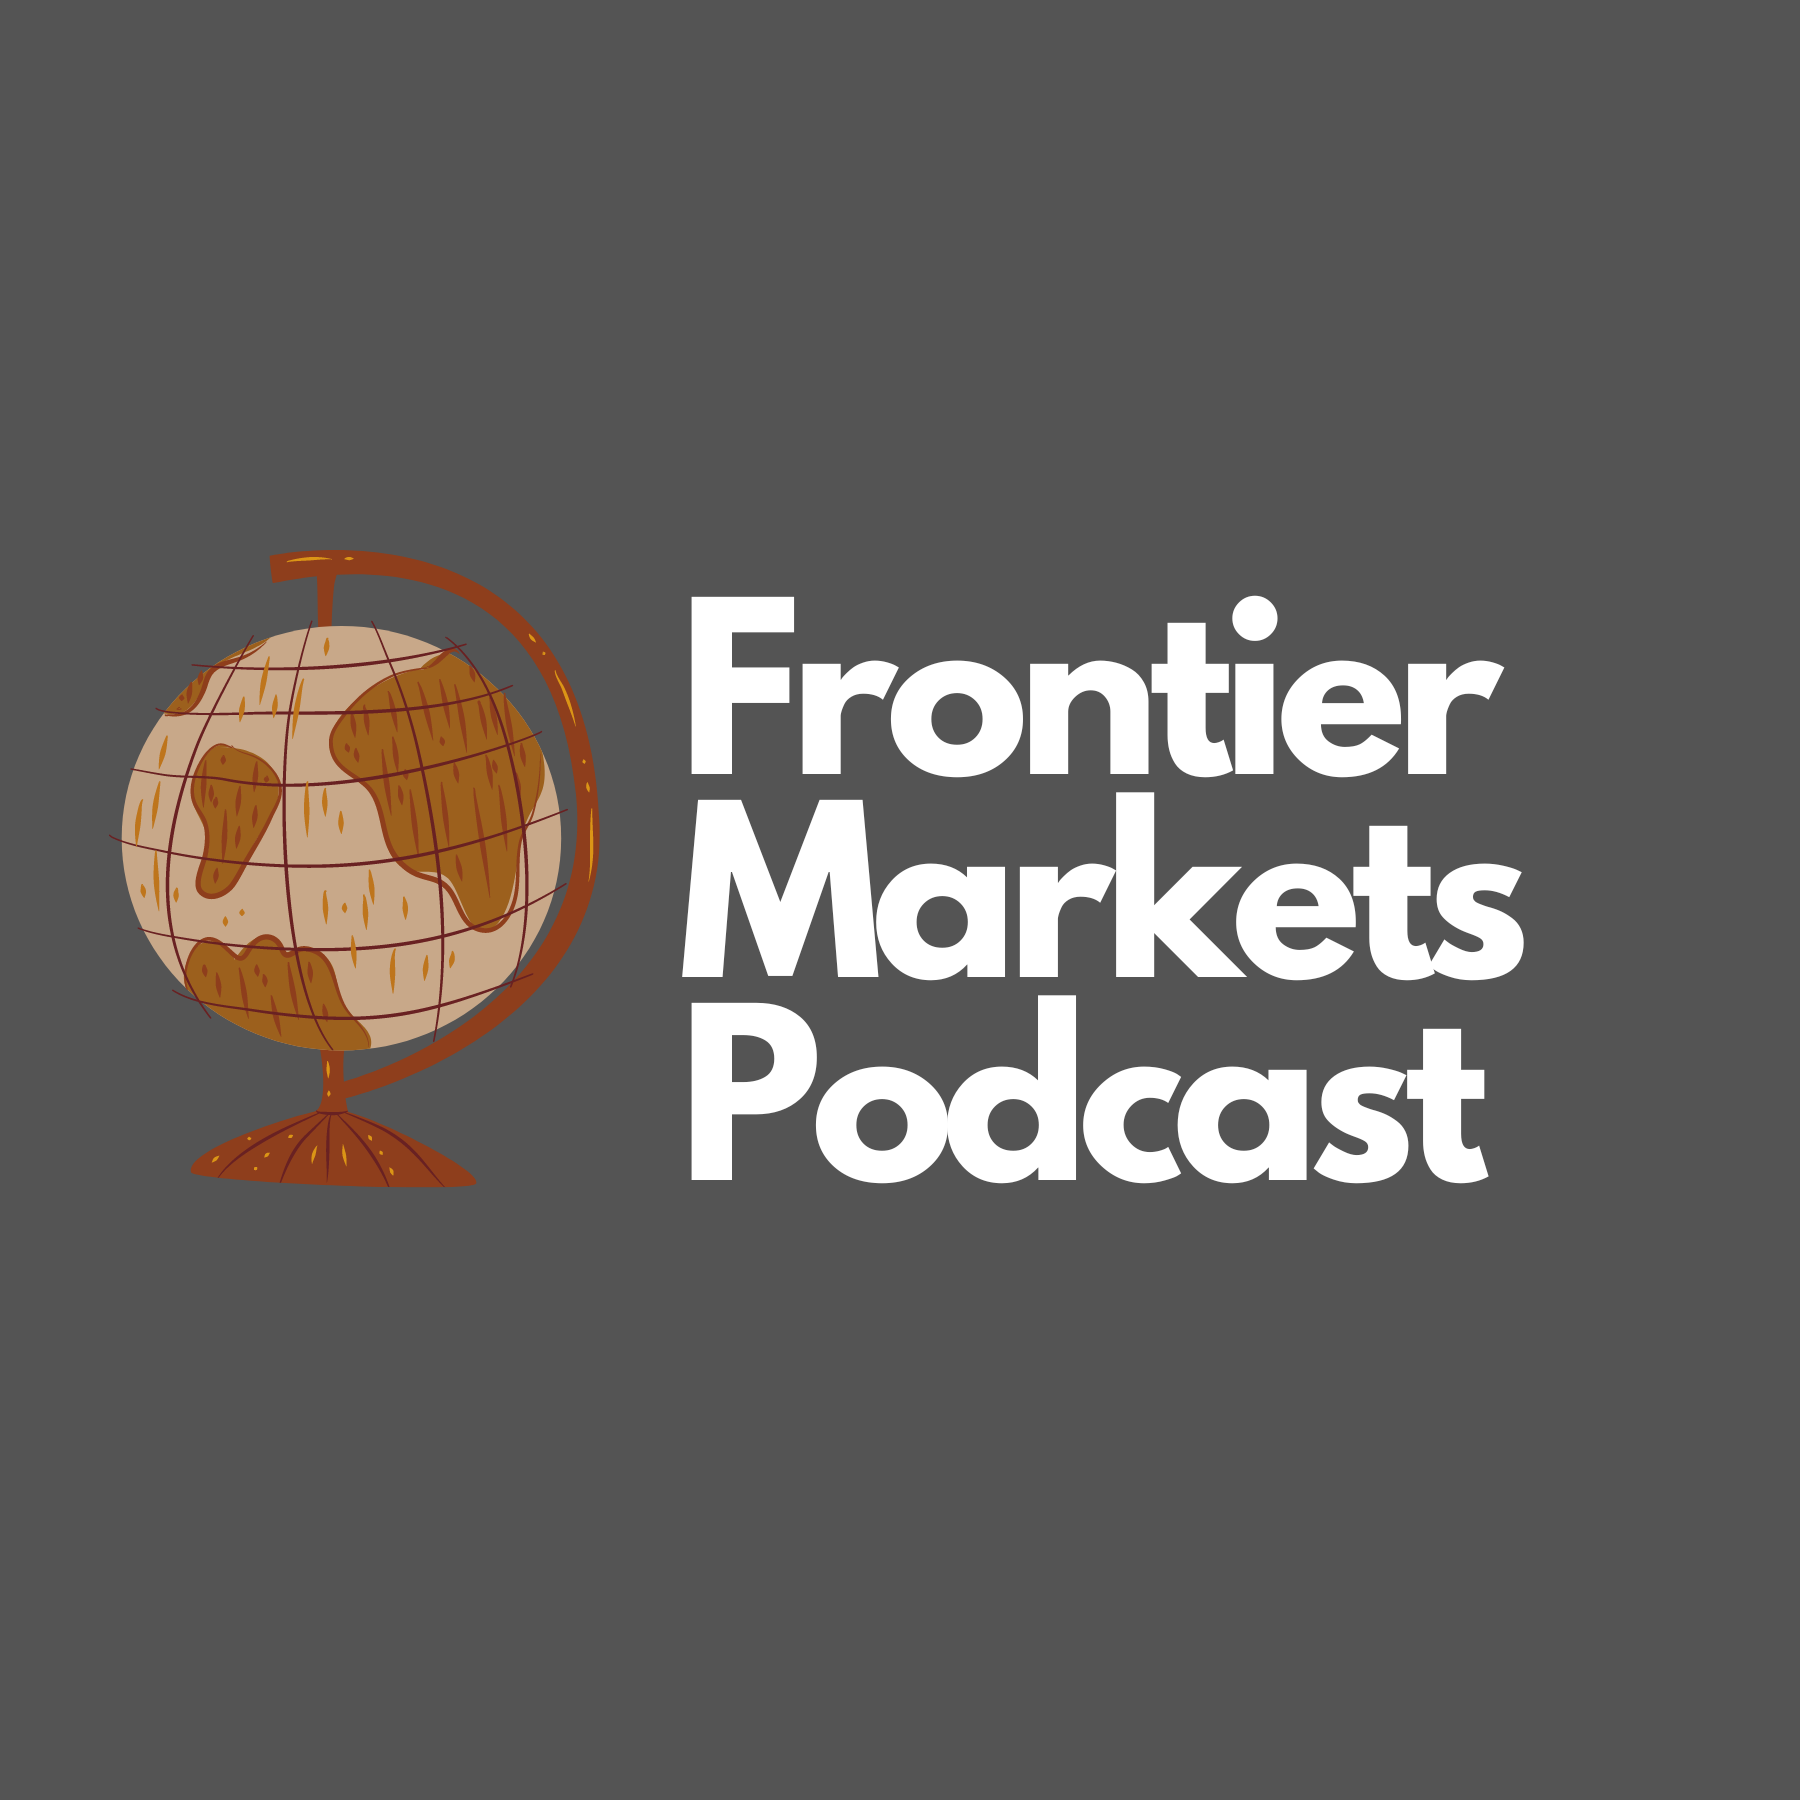 Frontier Markets Podcast